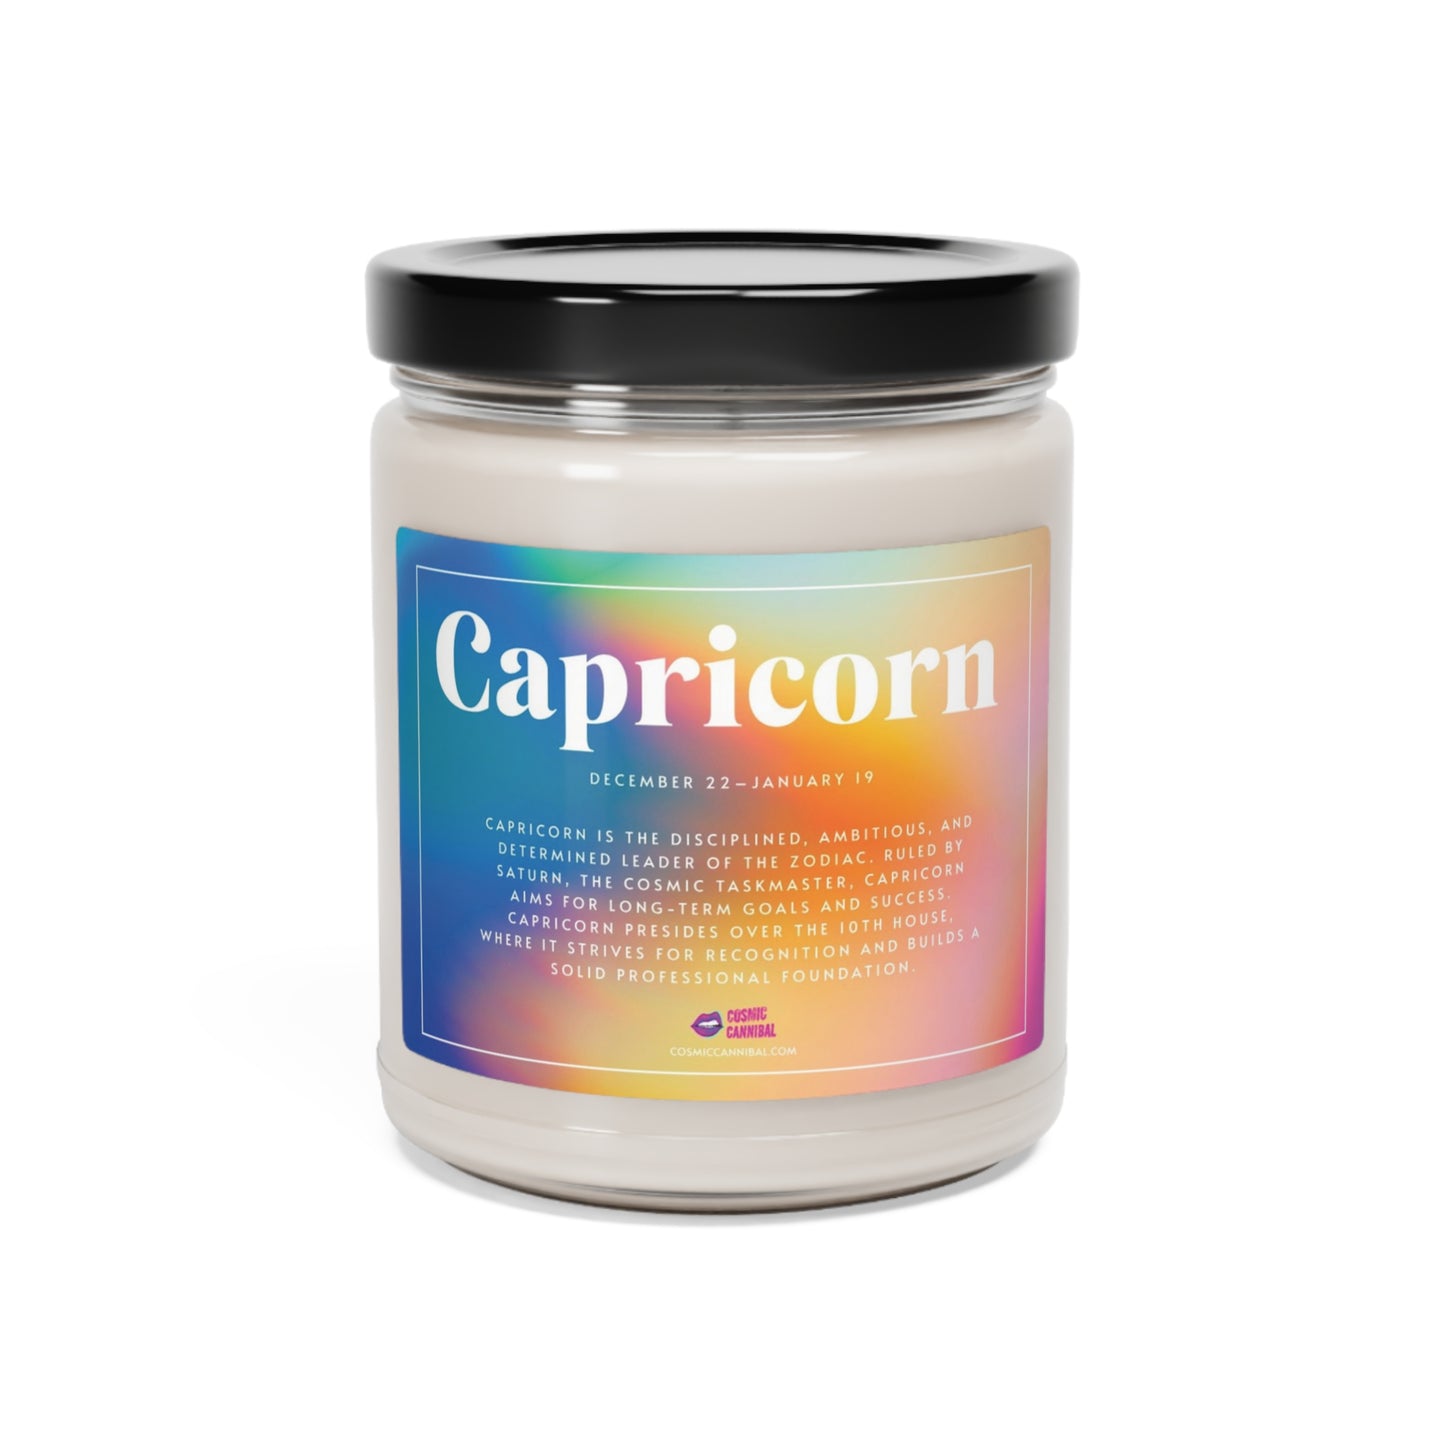 The Capricorn Candle